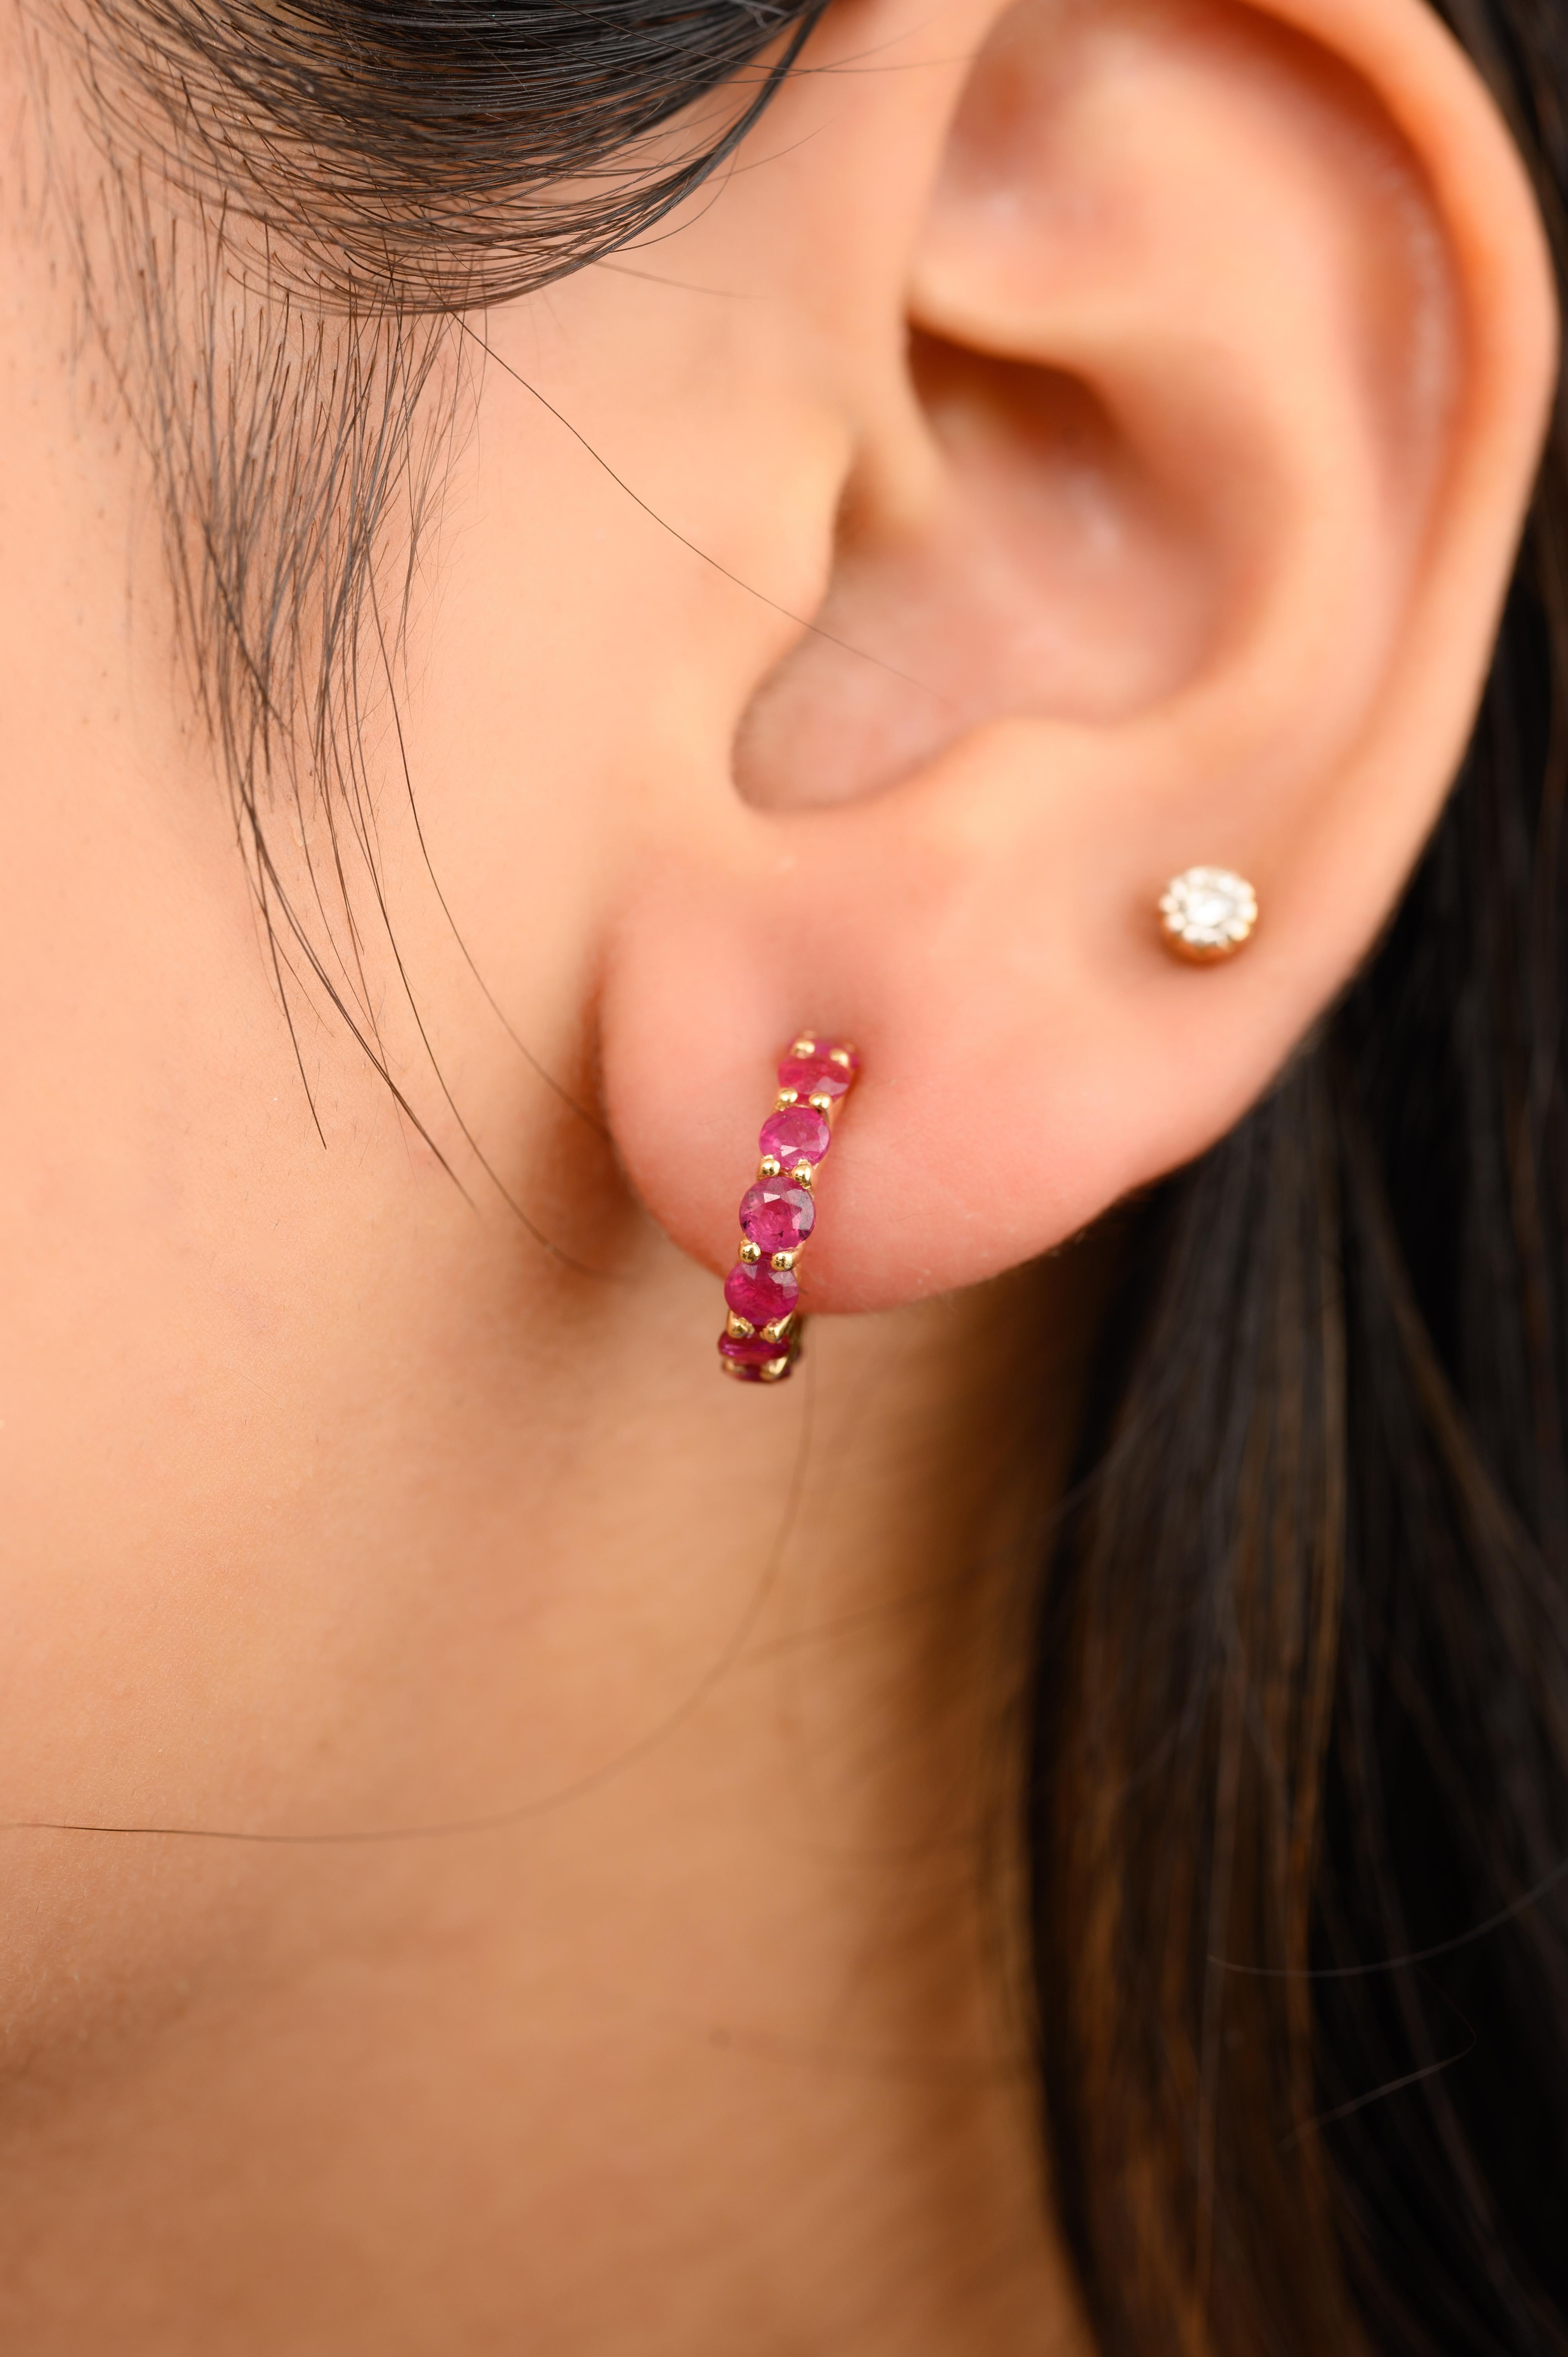 Dainty Ruby Huggie Hoop Earrings in 18K Gold to make a statement with your look. You shall need hoop earrings to make a statement with your look. These earrings create a sparkling, luxurious look featuring round cut ruby.
Ruby improves mental